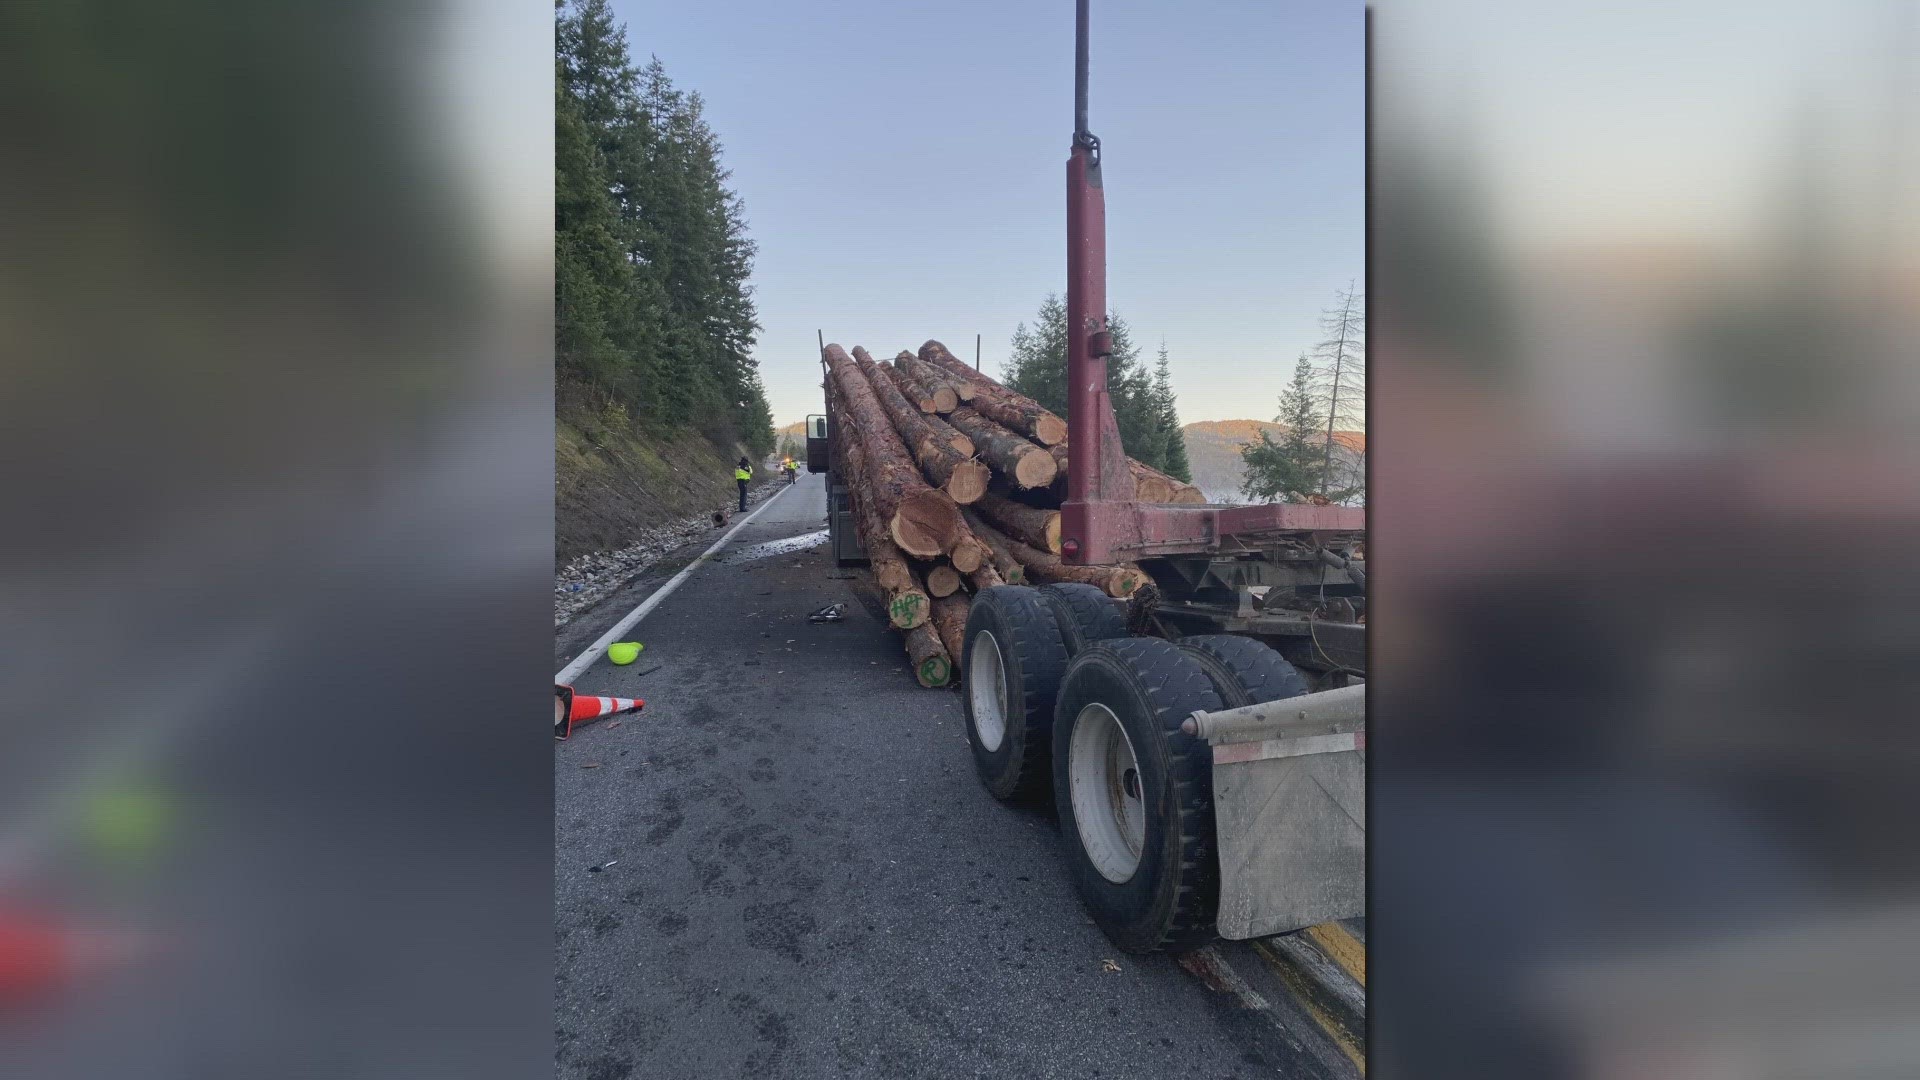 A man from Coeur d'Alene driving a 2016 Ford 150 pickup drove off the road and into a ditch before coming back onto the road and crashing head-on with a log truck.